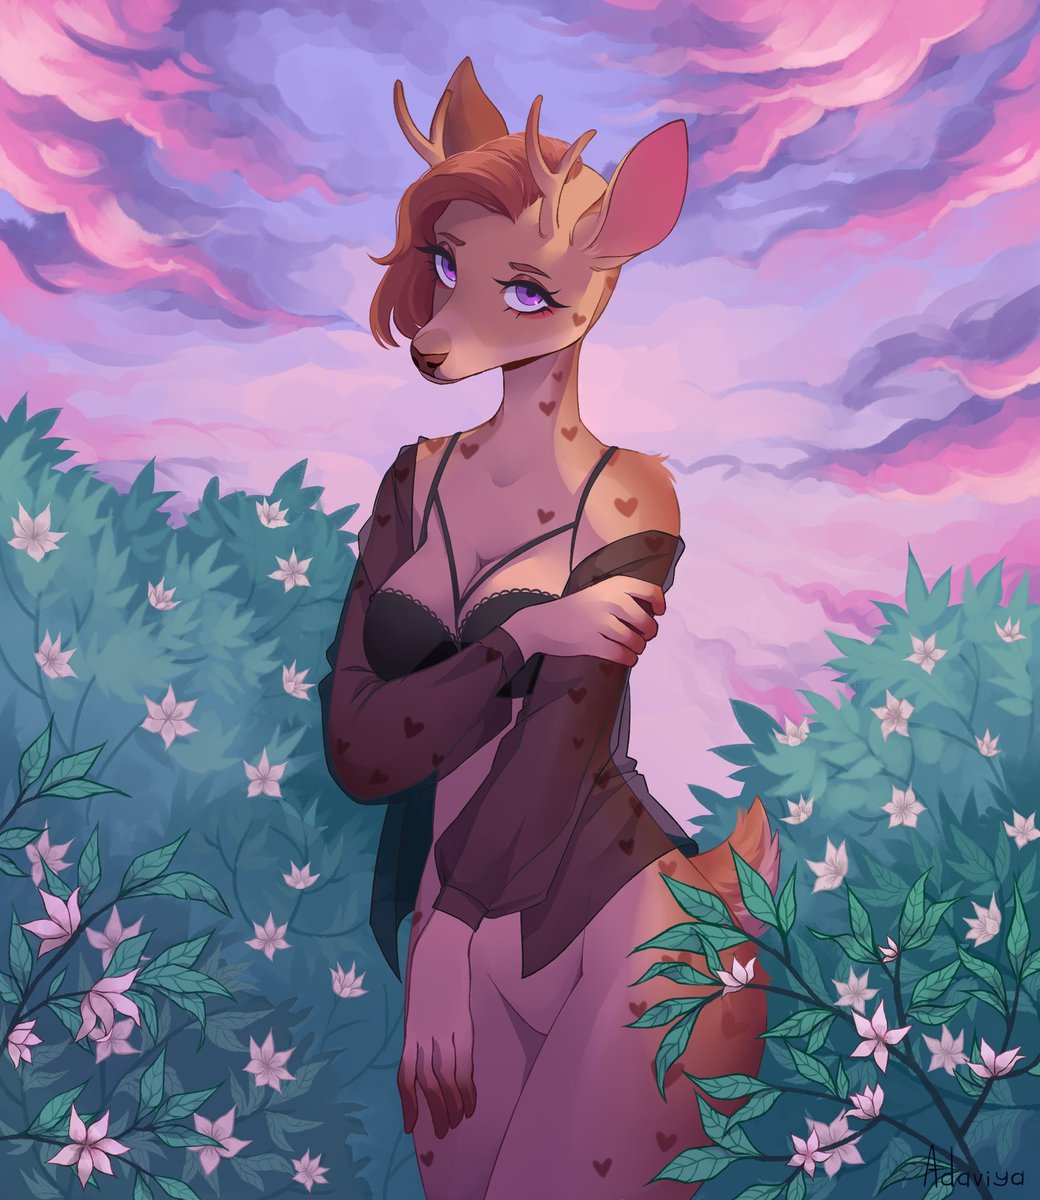 YCH 🌺

I already had a similar art a year ago. Can this be considered a kind of redraw haha? :D

I enjoyed working on this art ~

#furry #anthro #furryart #anthroart #deer #furrydeer #anthrodeer #dawn #ych #ychcommission #femaledeer